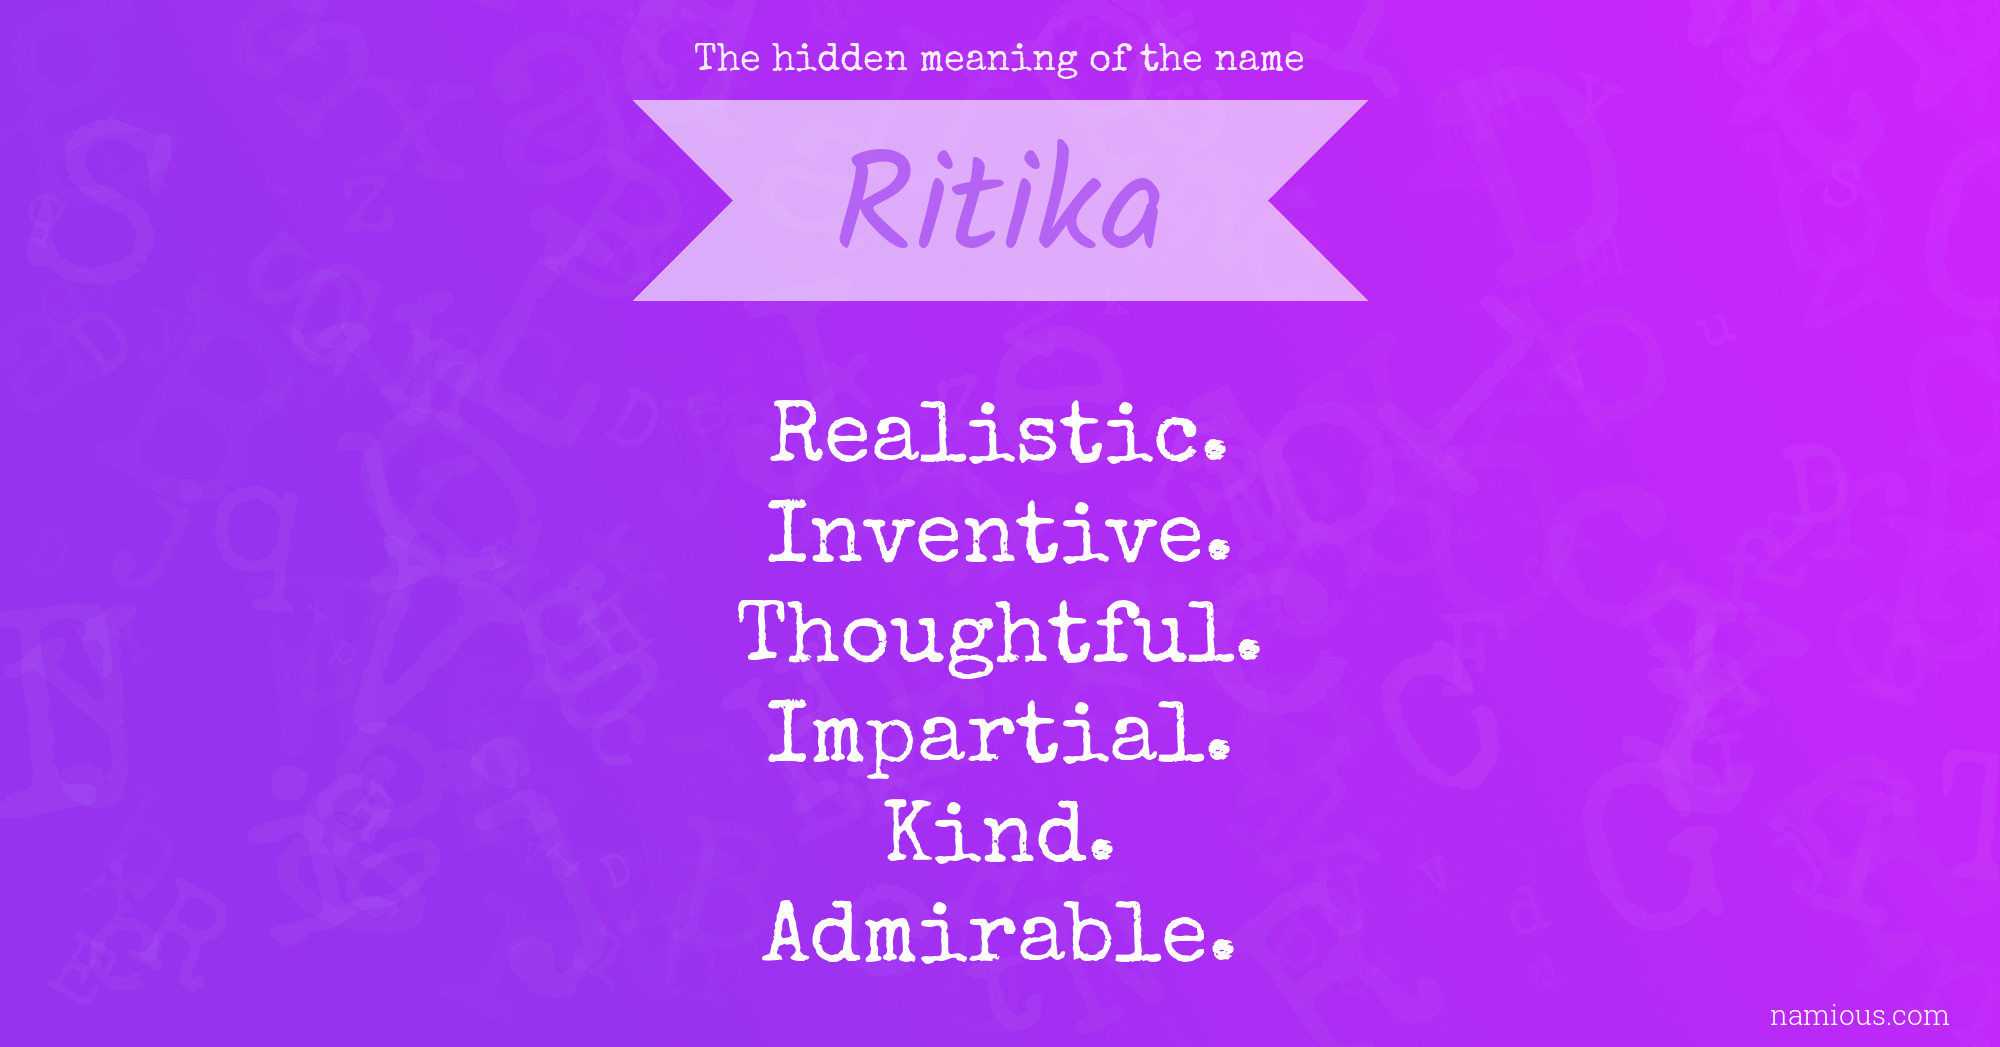 The hidden meaning of the name Ritika